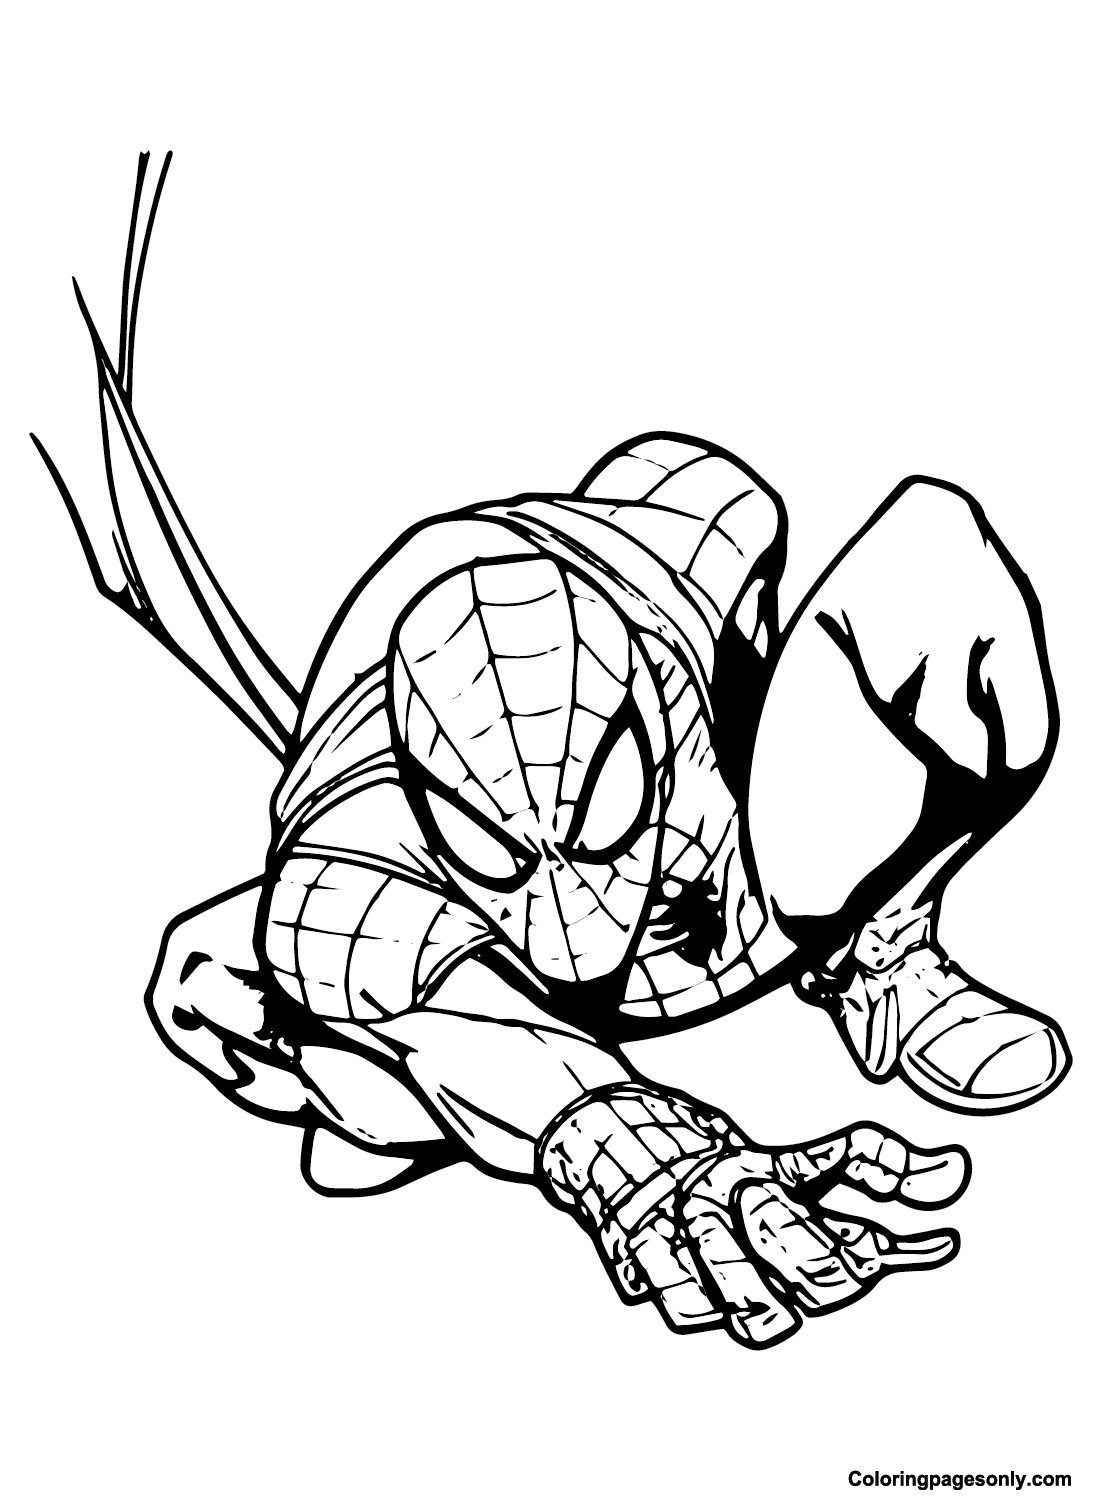 Spidey Pictures Coloring Page